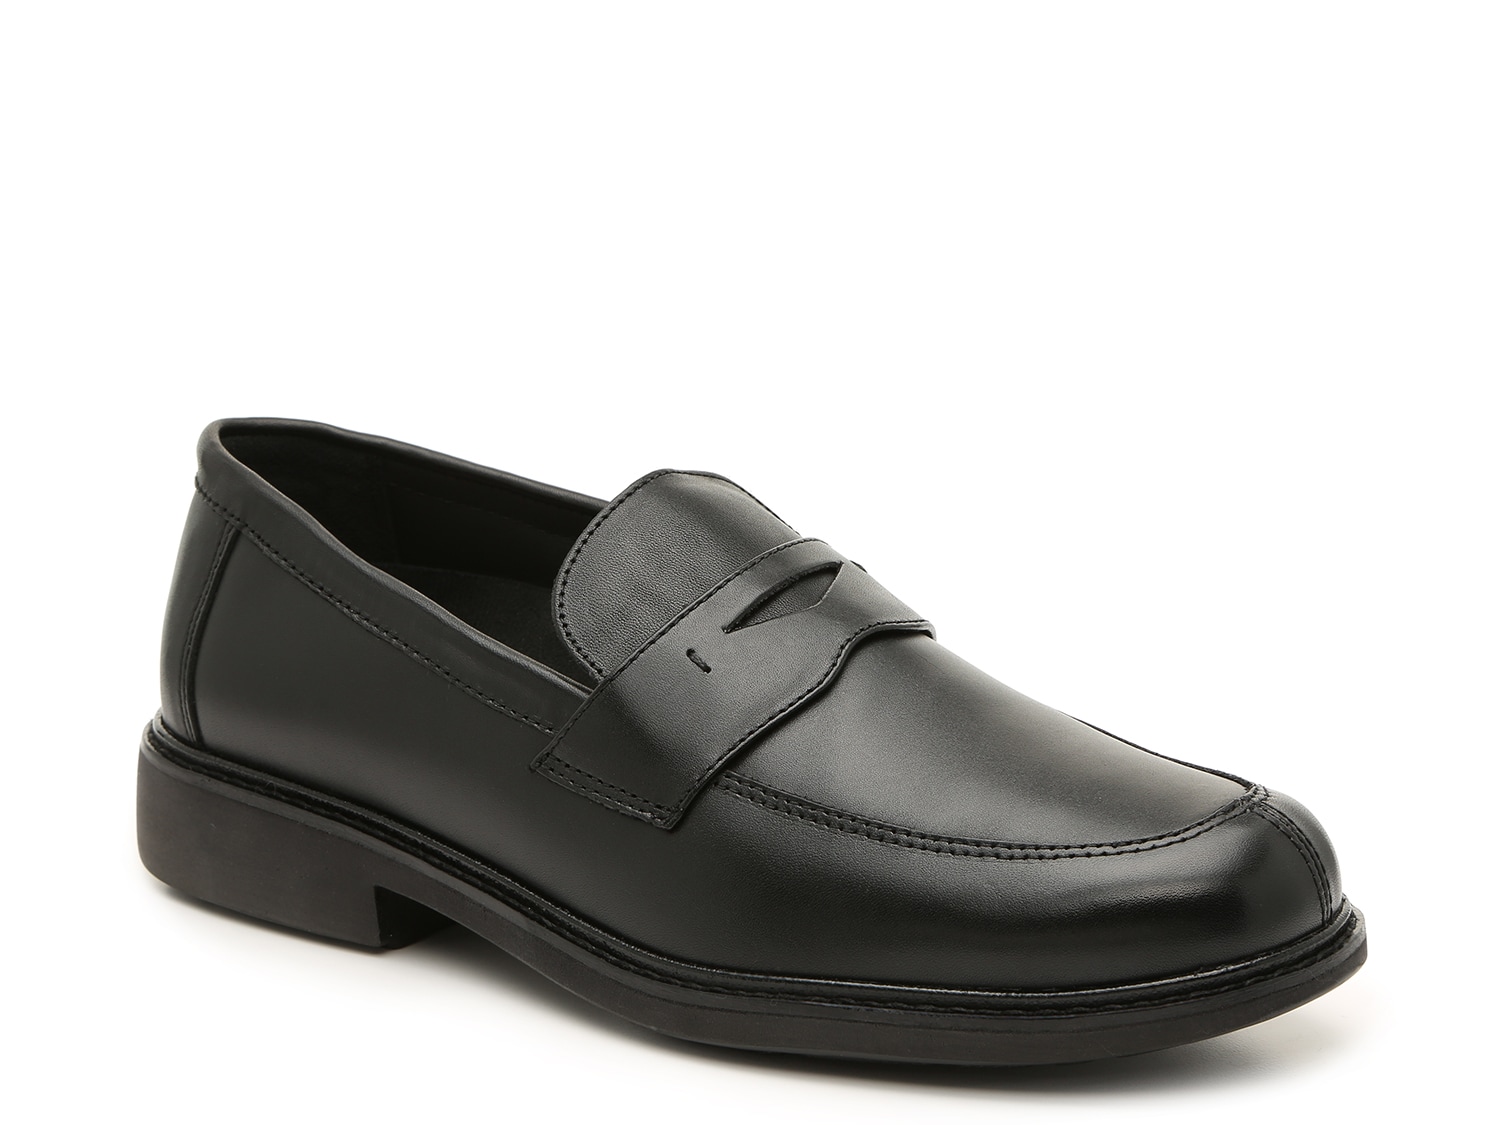 Drew Essex Penny Loafer - Free Shipping | DSW